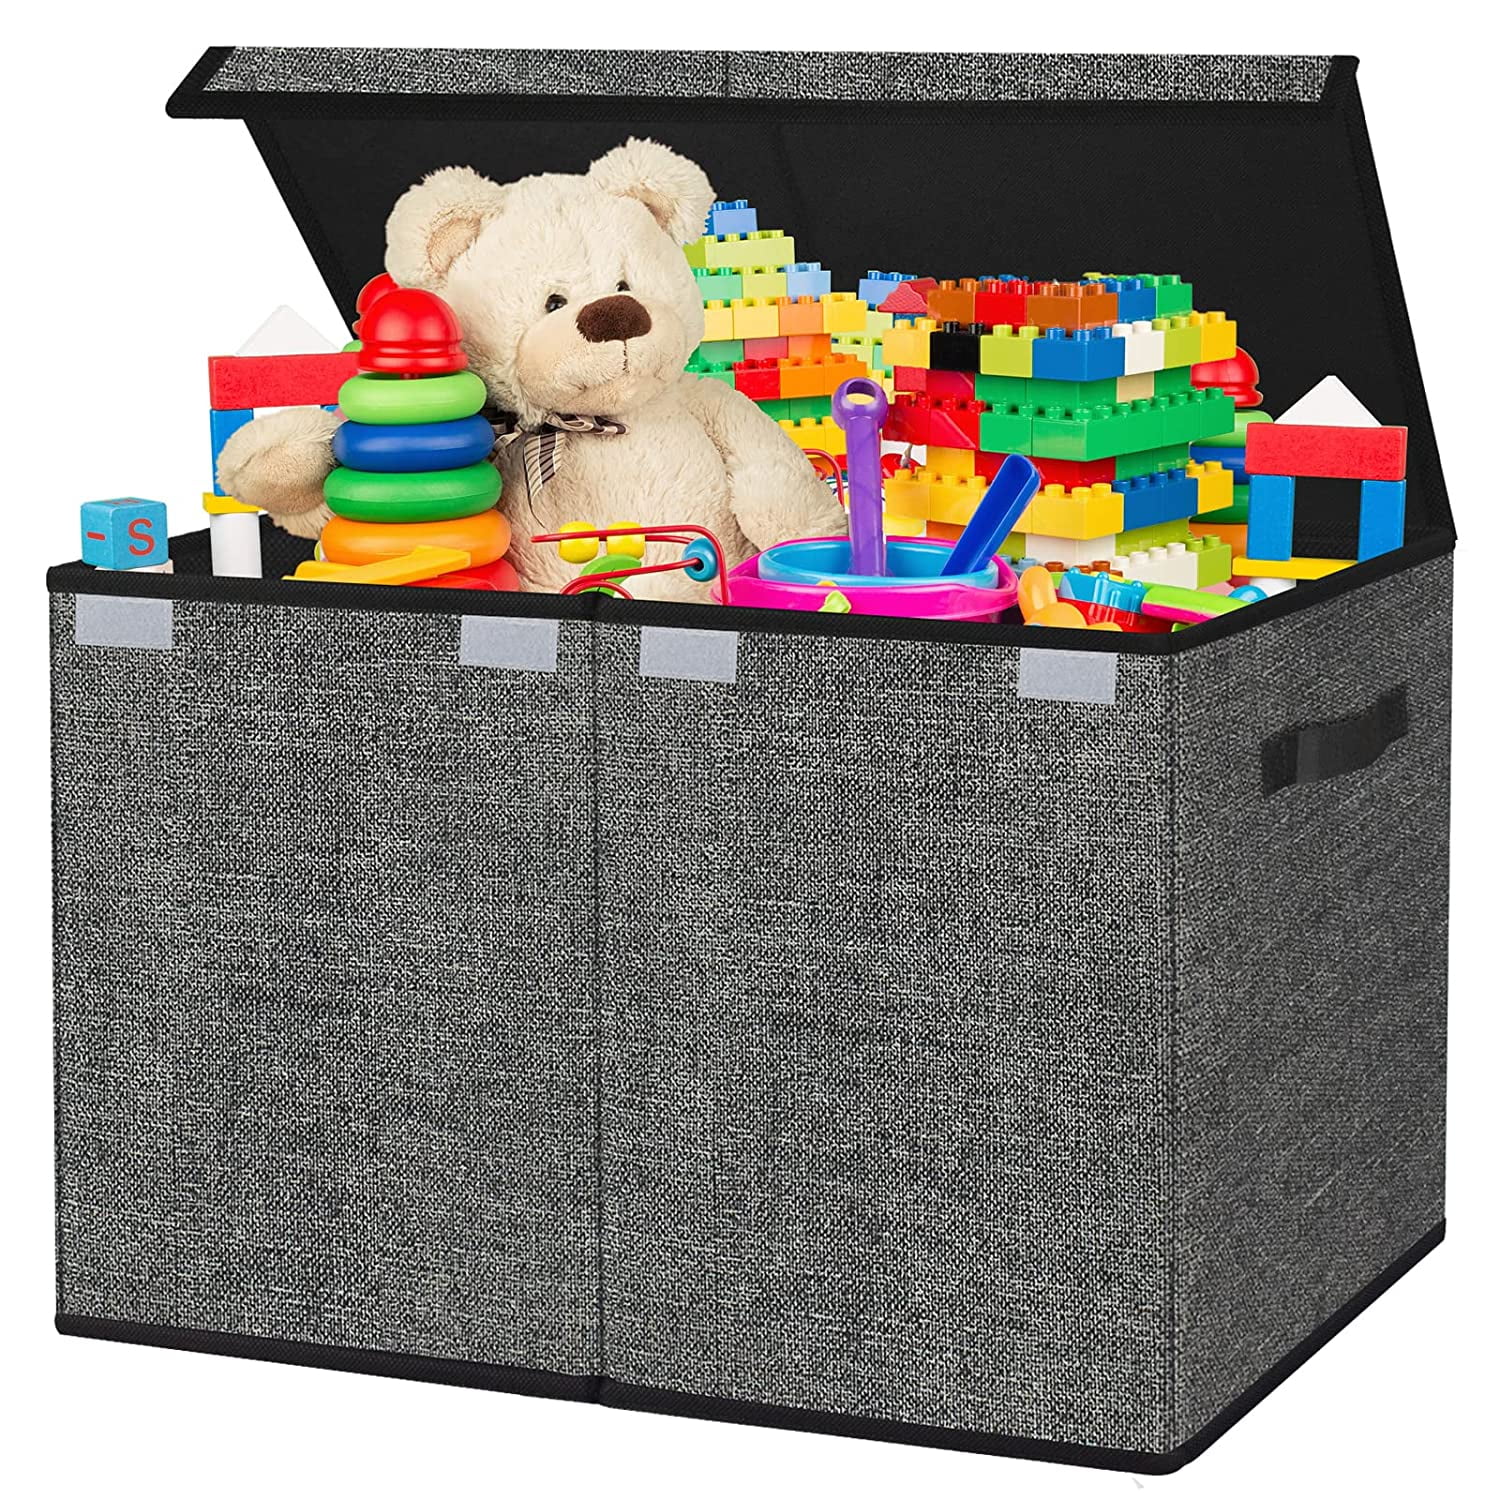 PHINOX Toy Box Storage, Toy Chest Toy Organizers and Storage Bins, Large  Toy Box for Boys Girls, 70L Toy Storage Organizer with Wheels, Collapsible